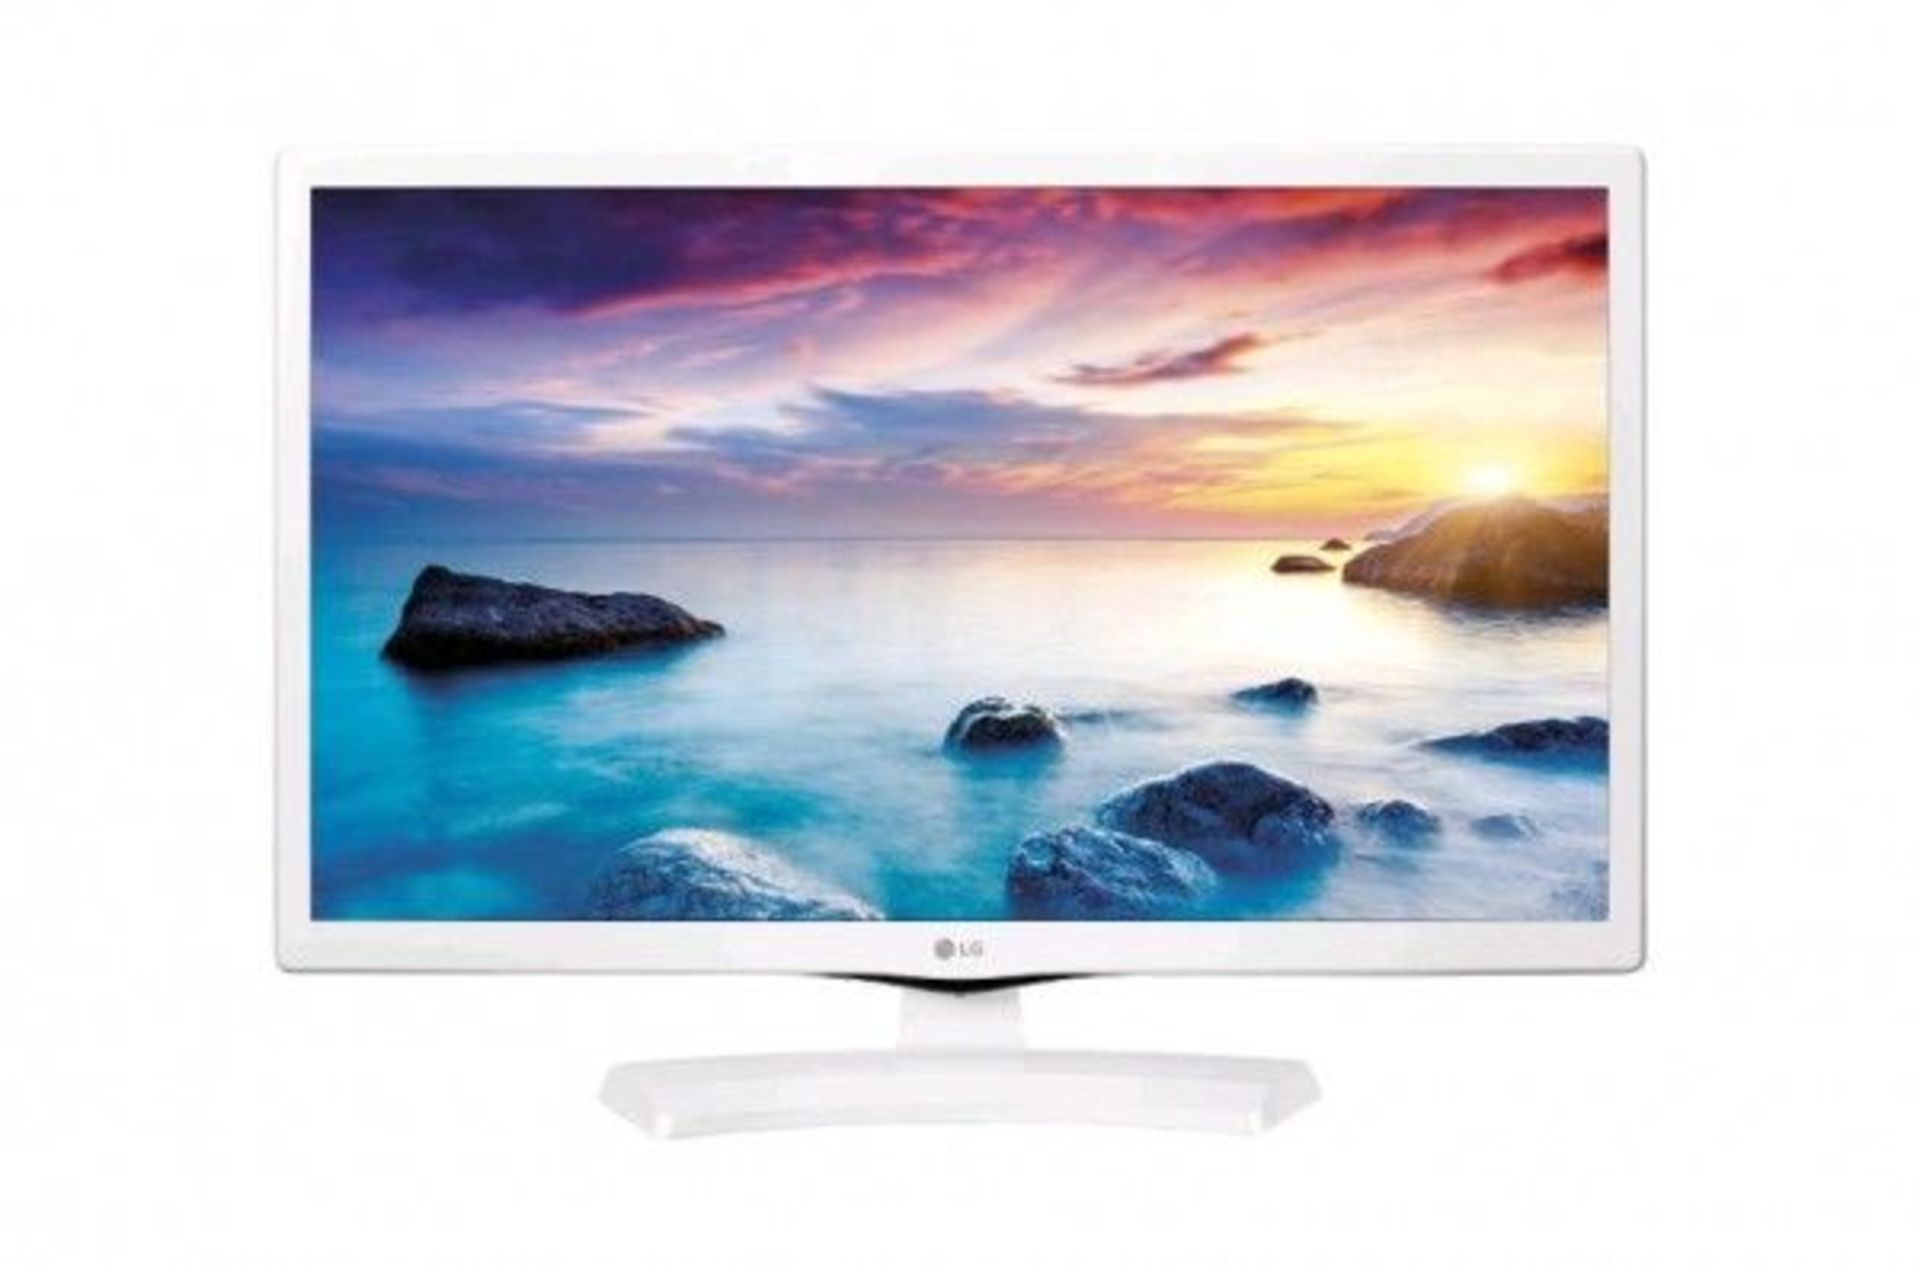 + VAT Grade A LG 28 Inch HD READY LED TV WITH FREEVIEW - WHITE 28MT49VW-WZ